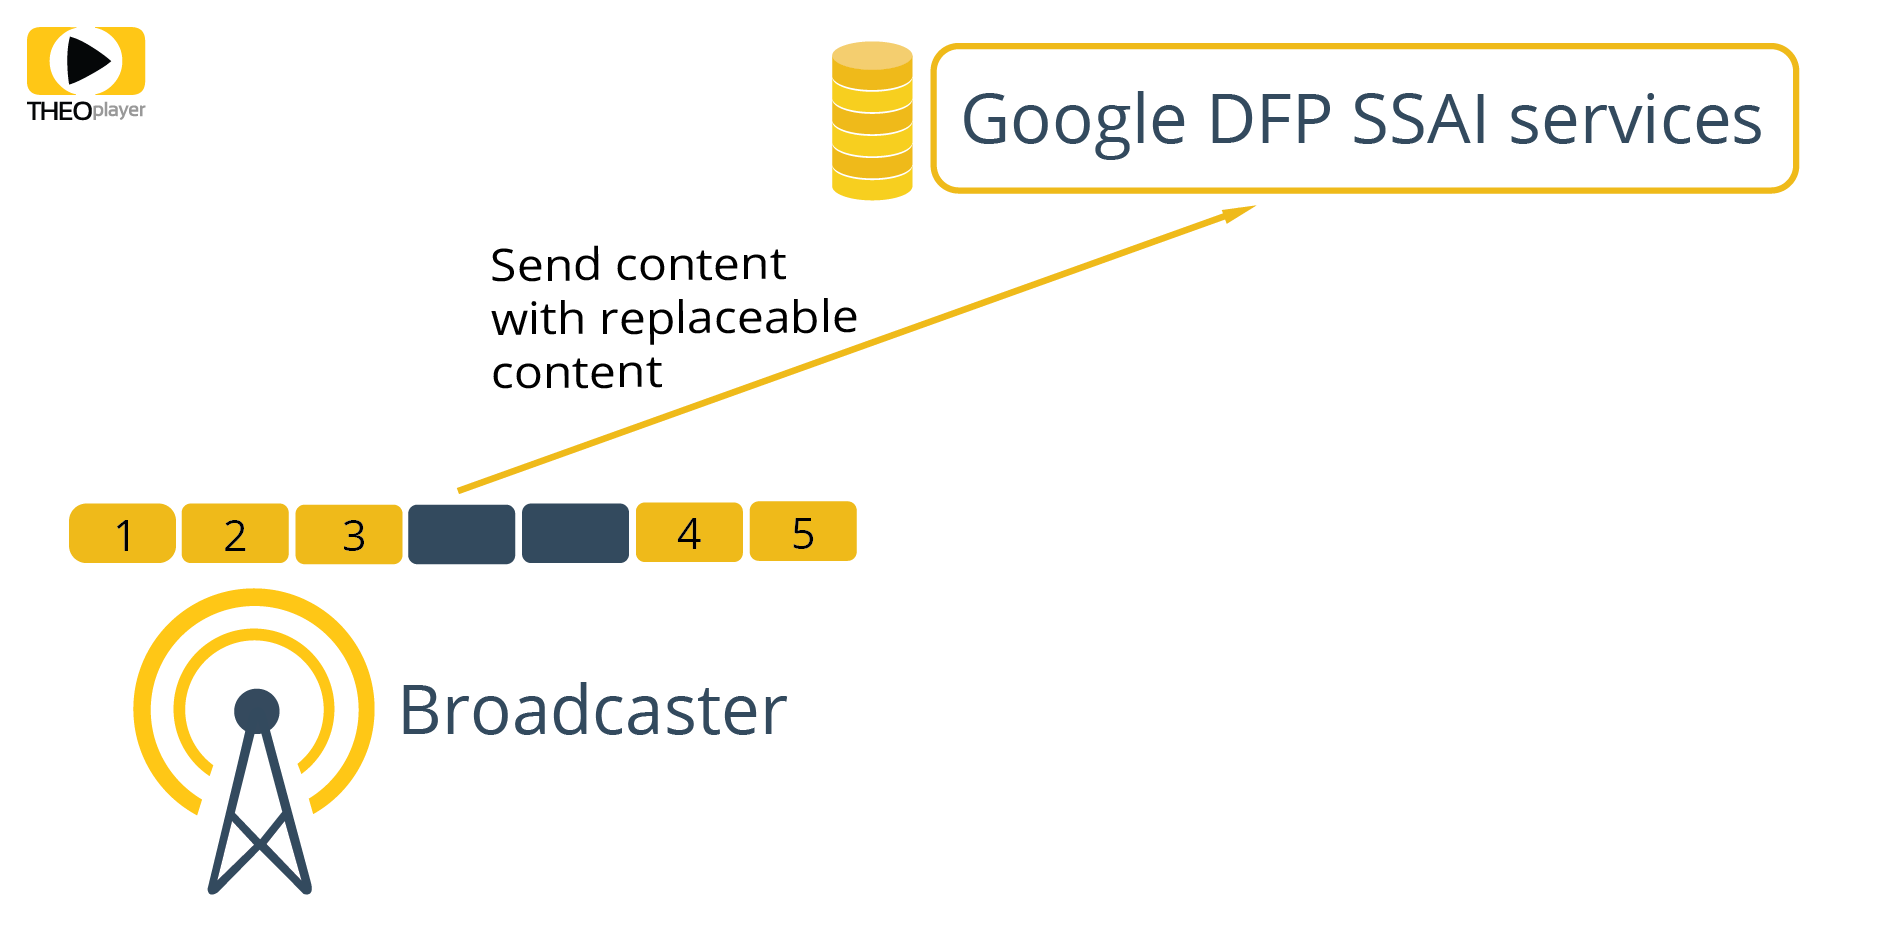 THEOplayer and Google DFP